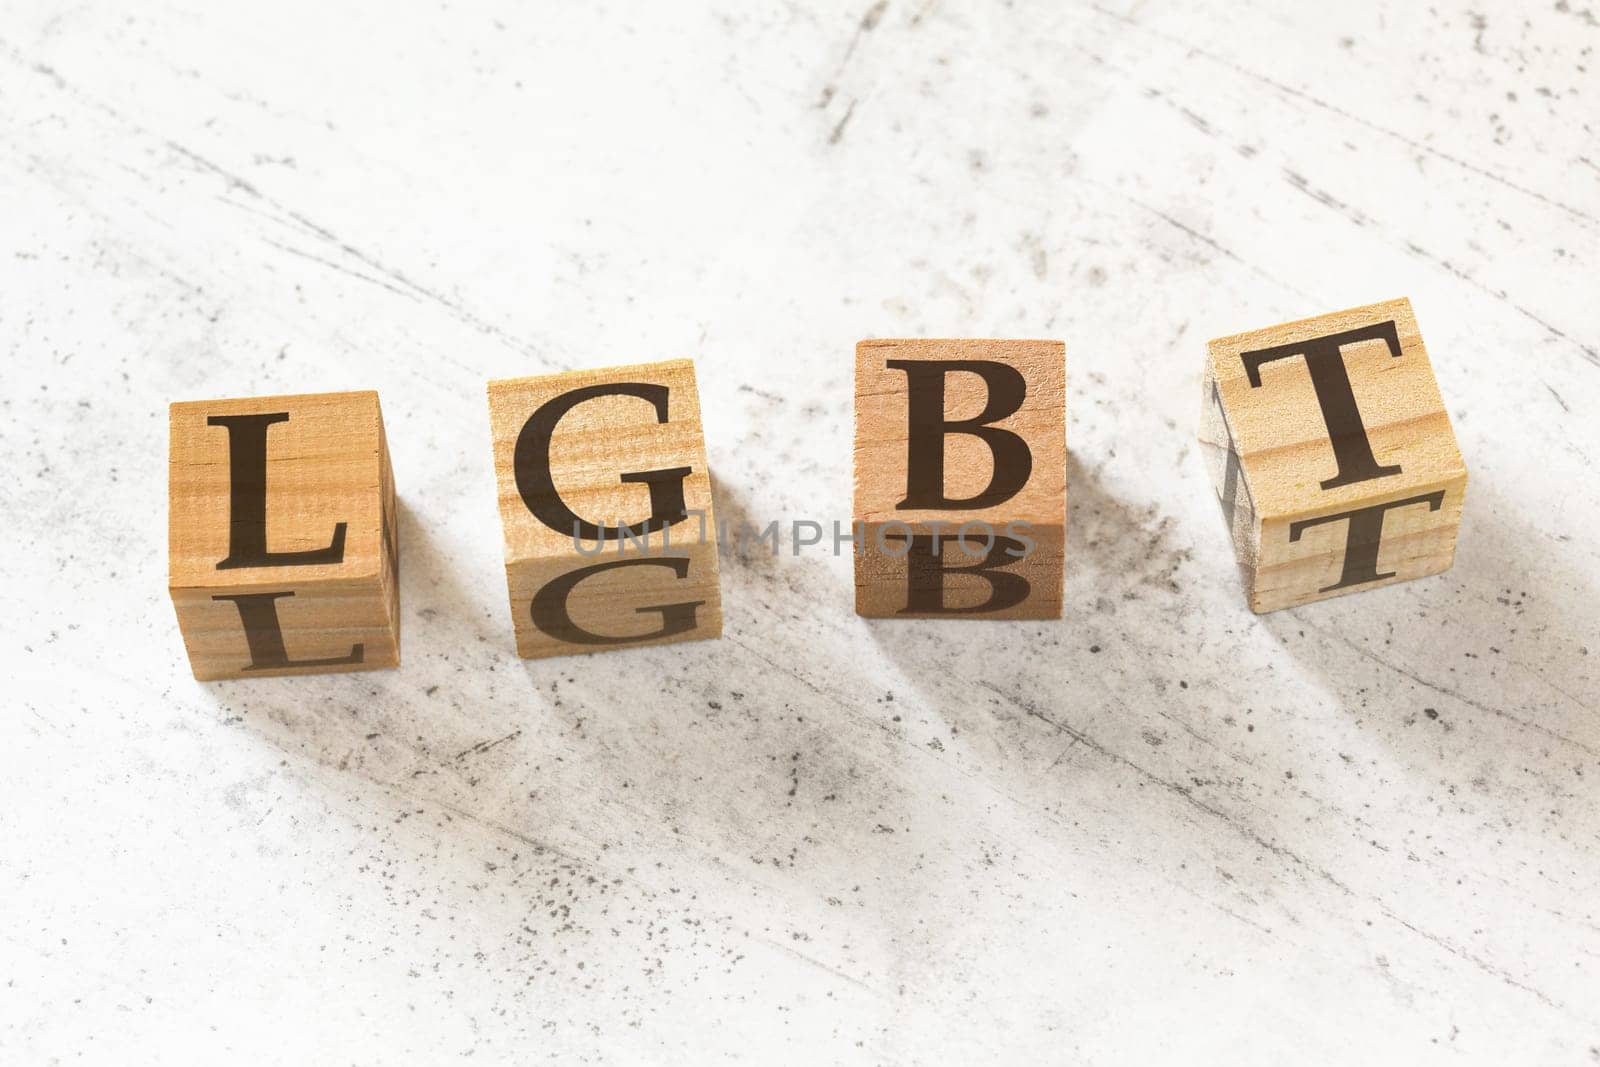 Four wooden cubes with letters LGBT (meaning lesbian, gay, bisexual, and transgender) on white working board.